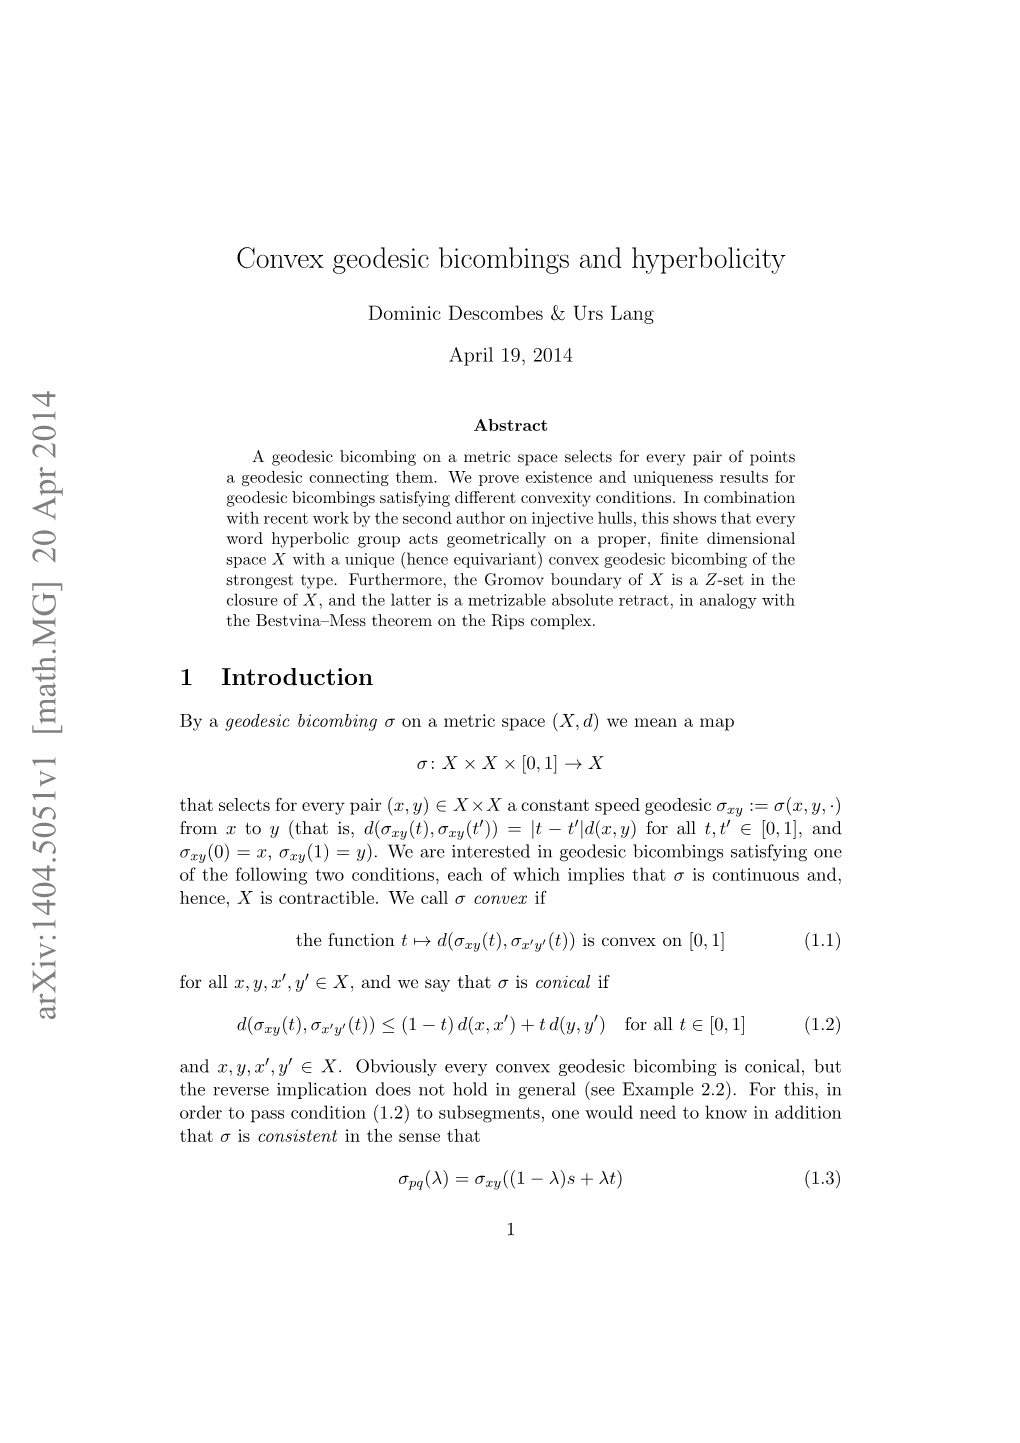 Convex Geodesic Bicombings and Hyperbolicity